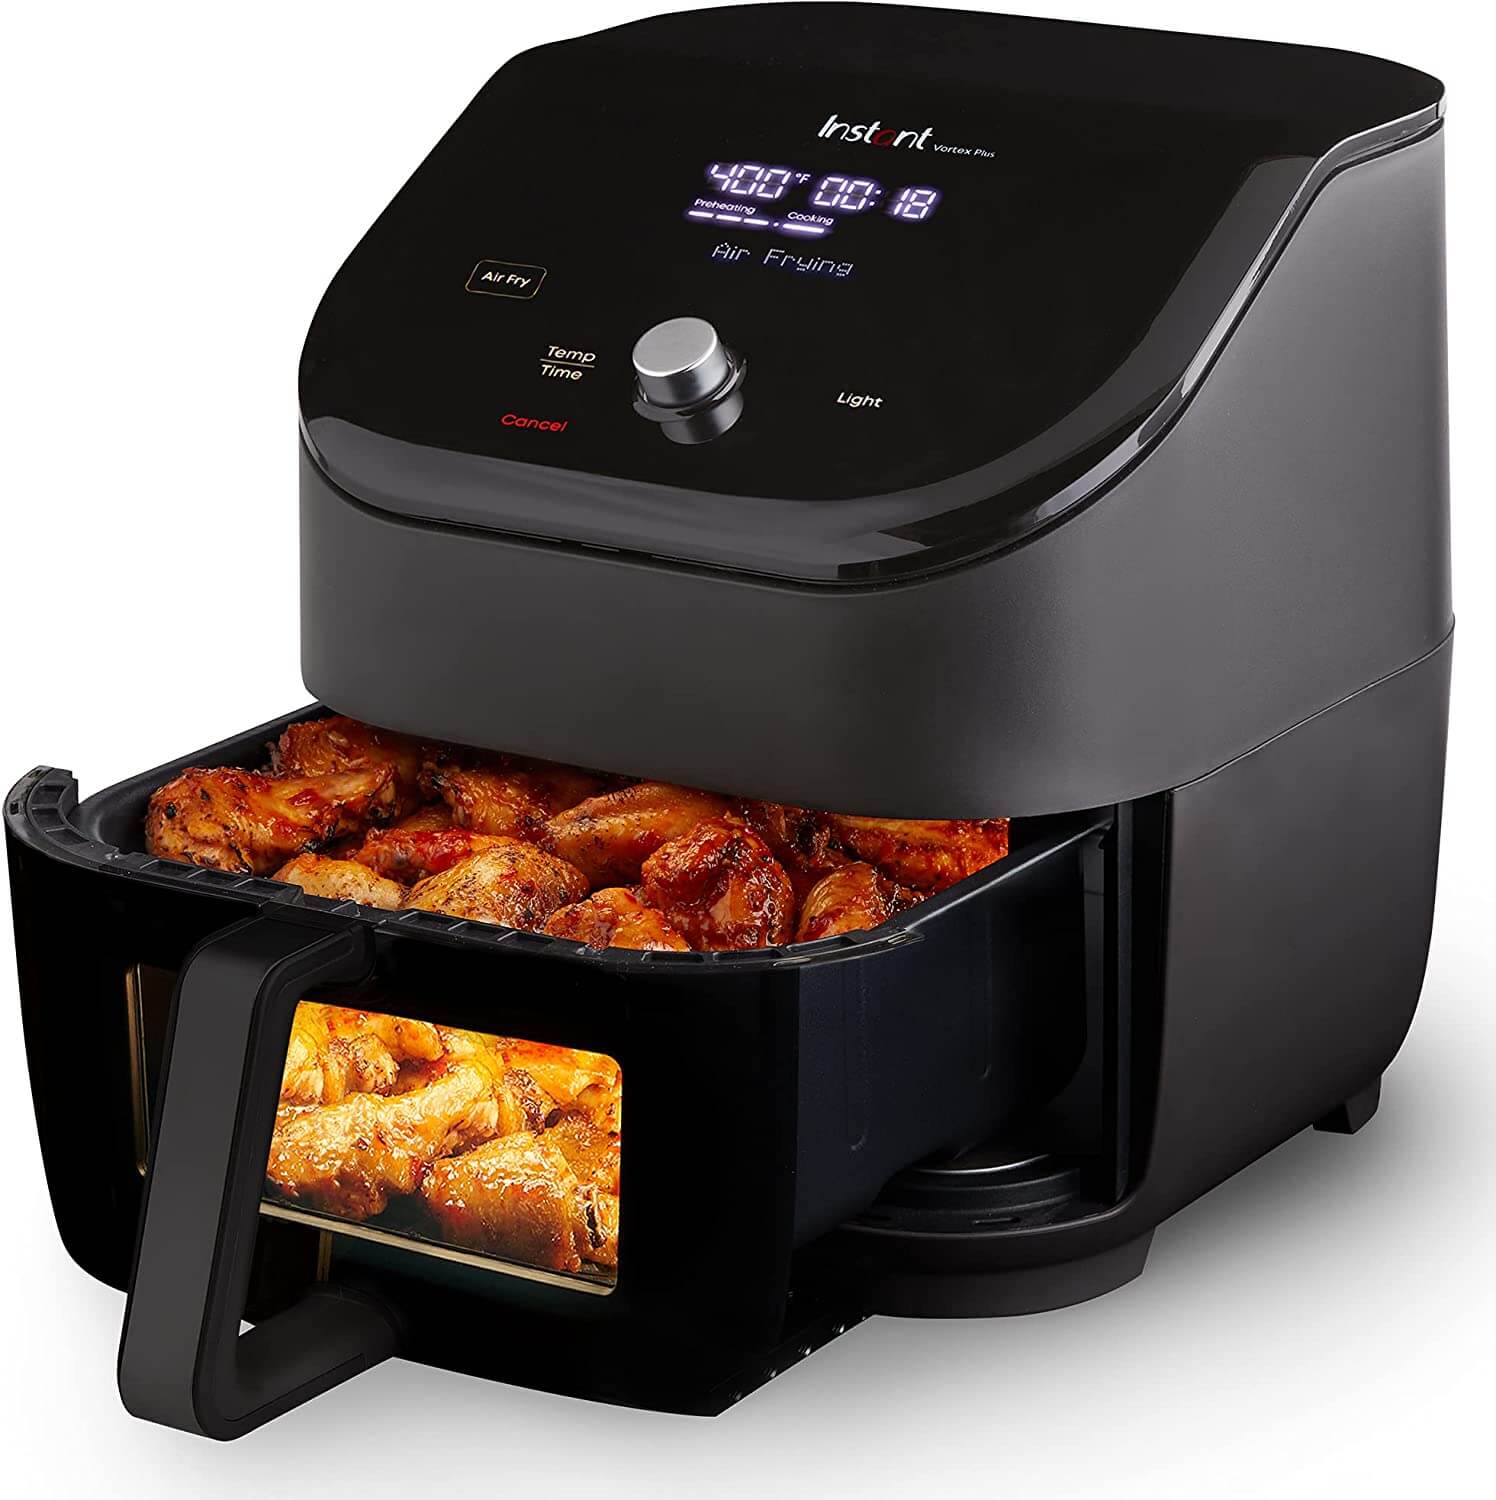 black air fryer with drawer open and food inside